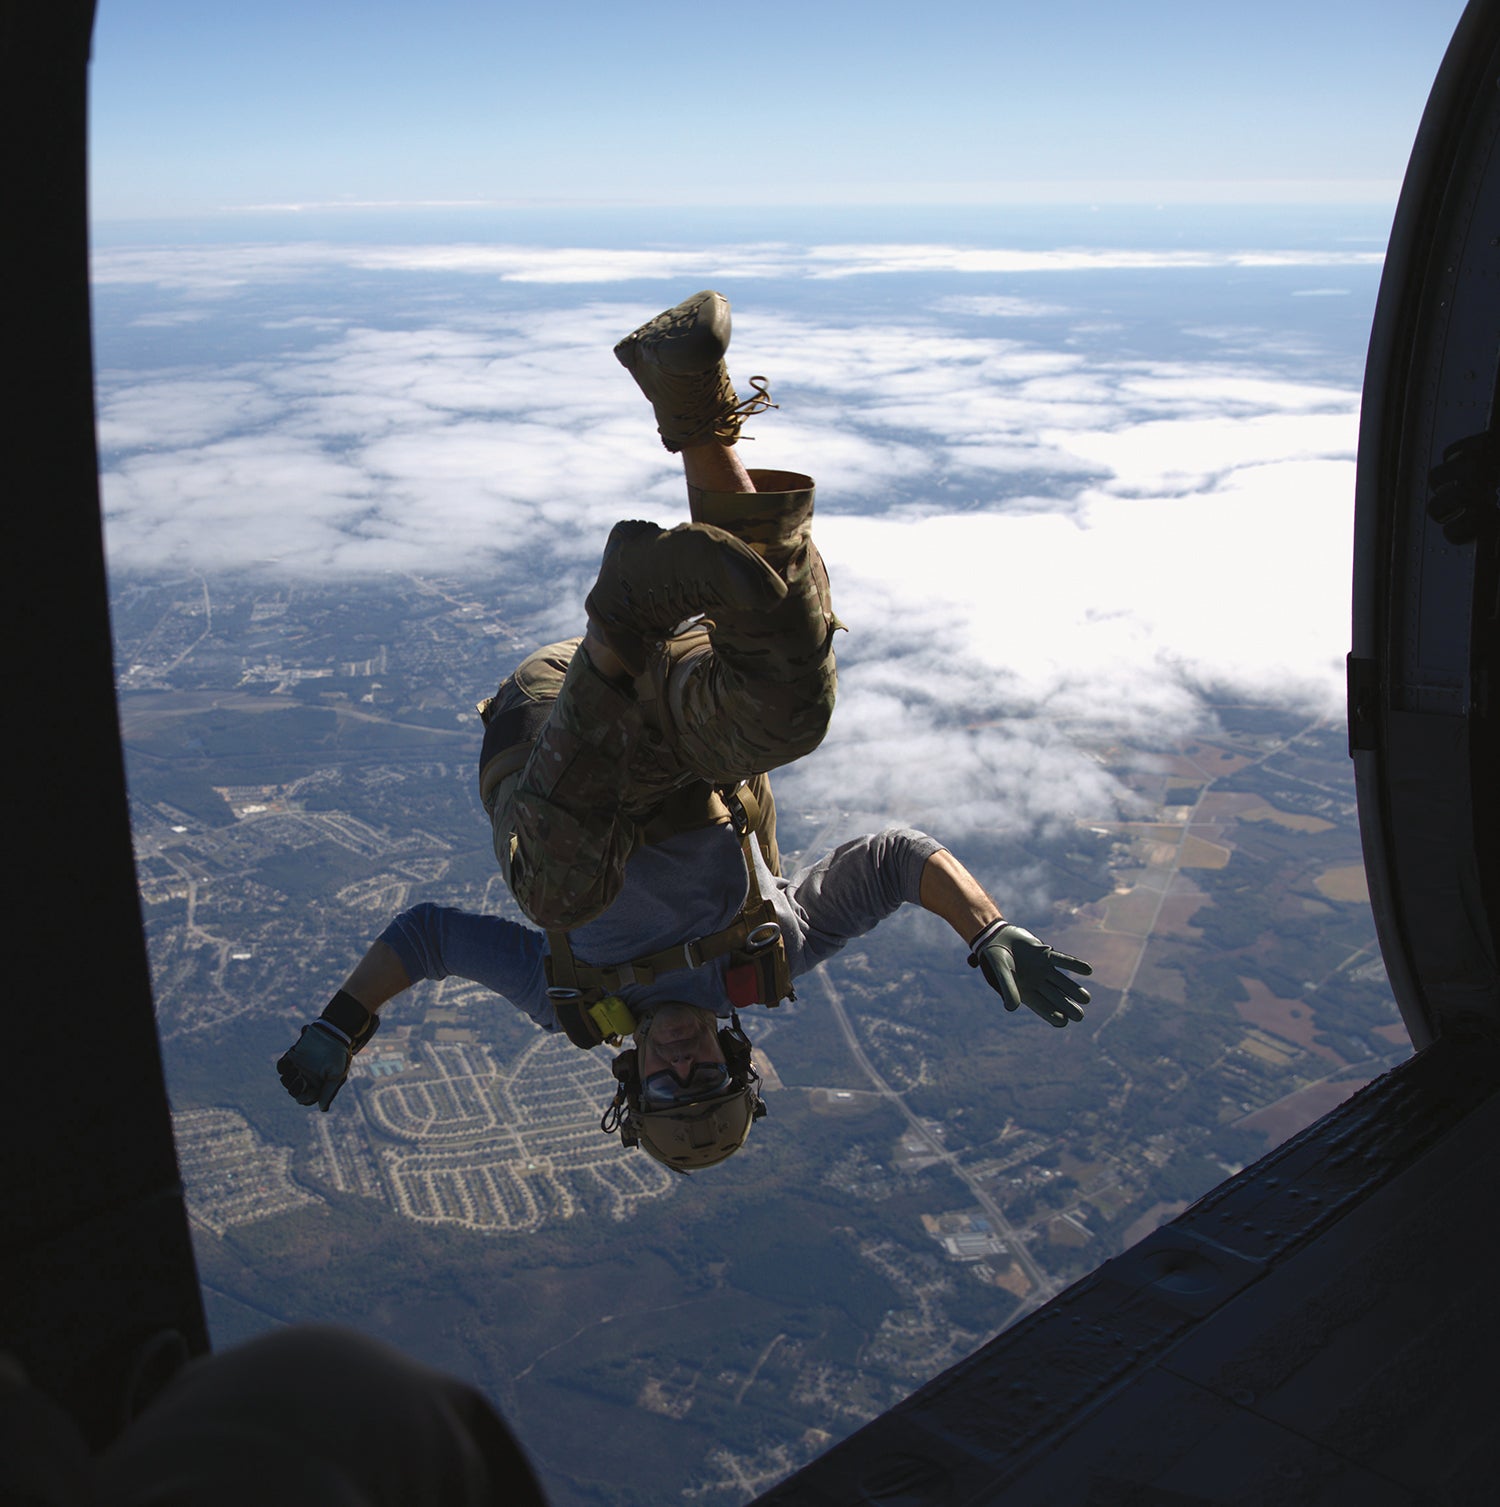 A soldier performs a high-altitude jump during an exercise at Fort Liberty, North Carolina. (Credit: U.S. Army/Spc. Zoe Tourne)